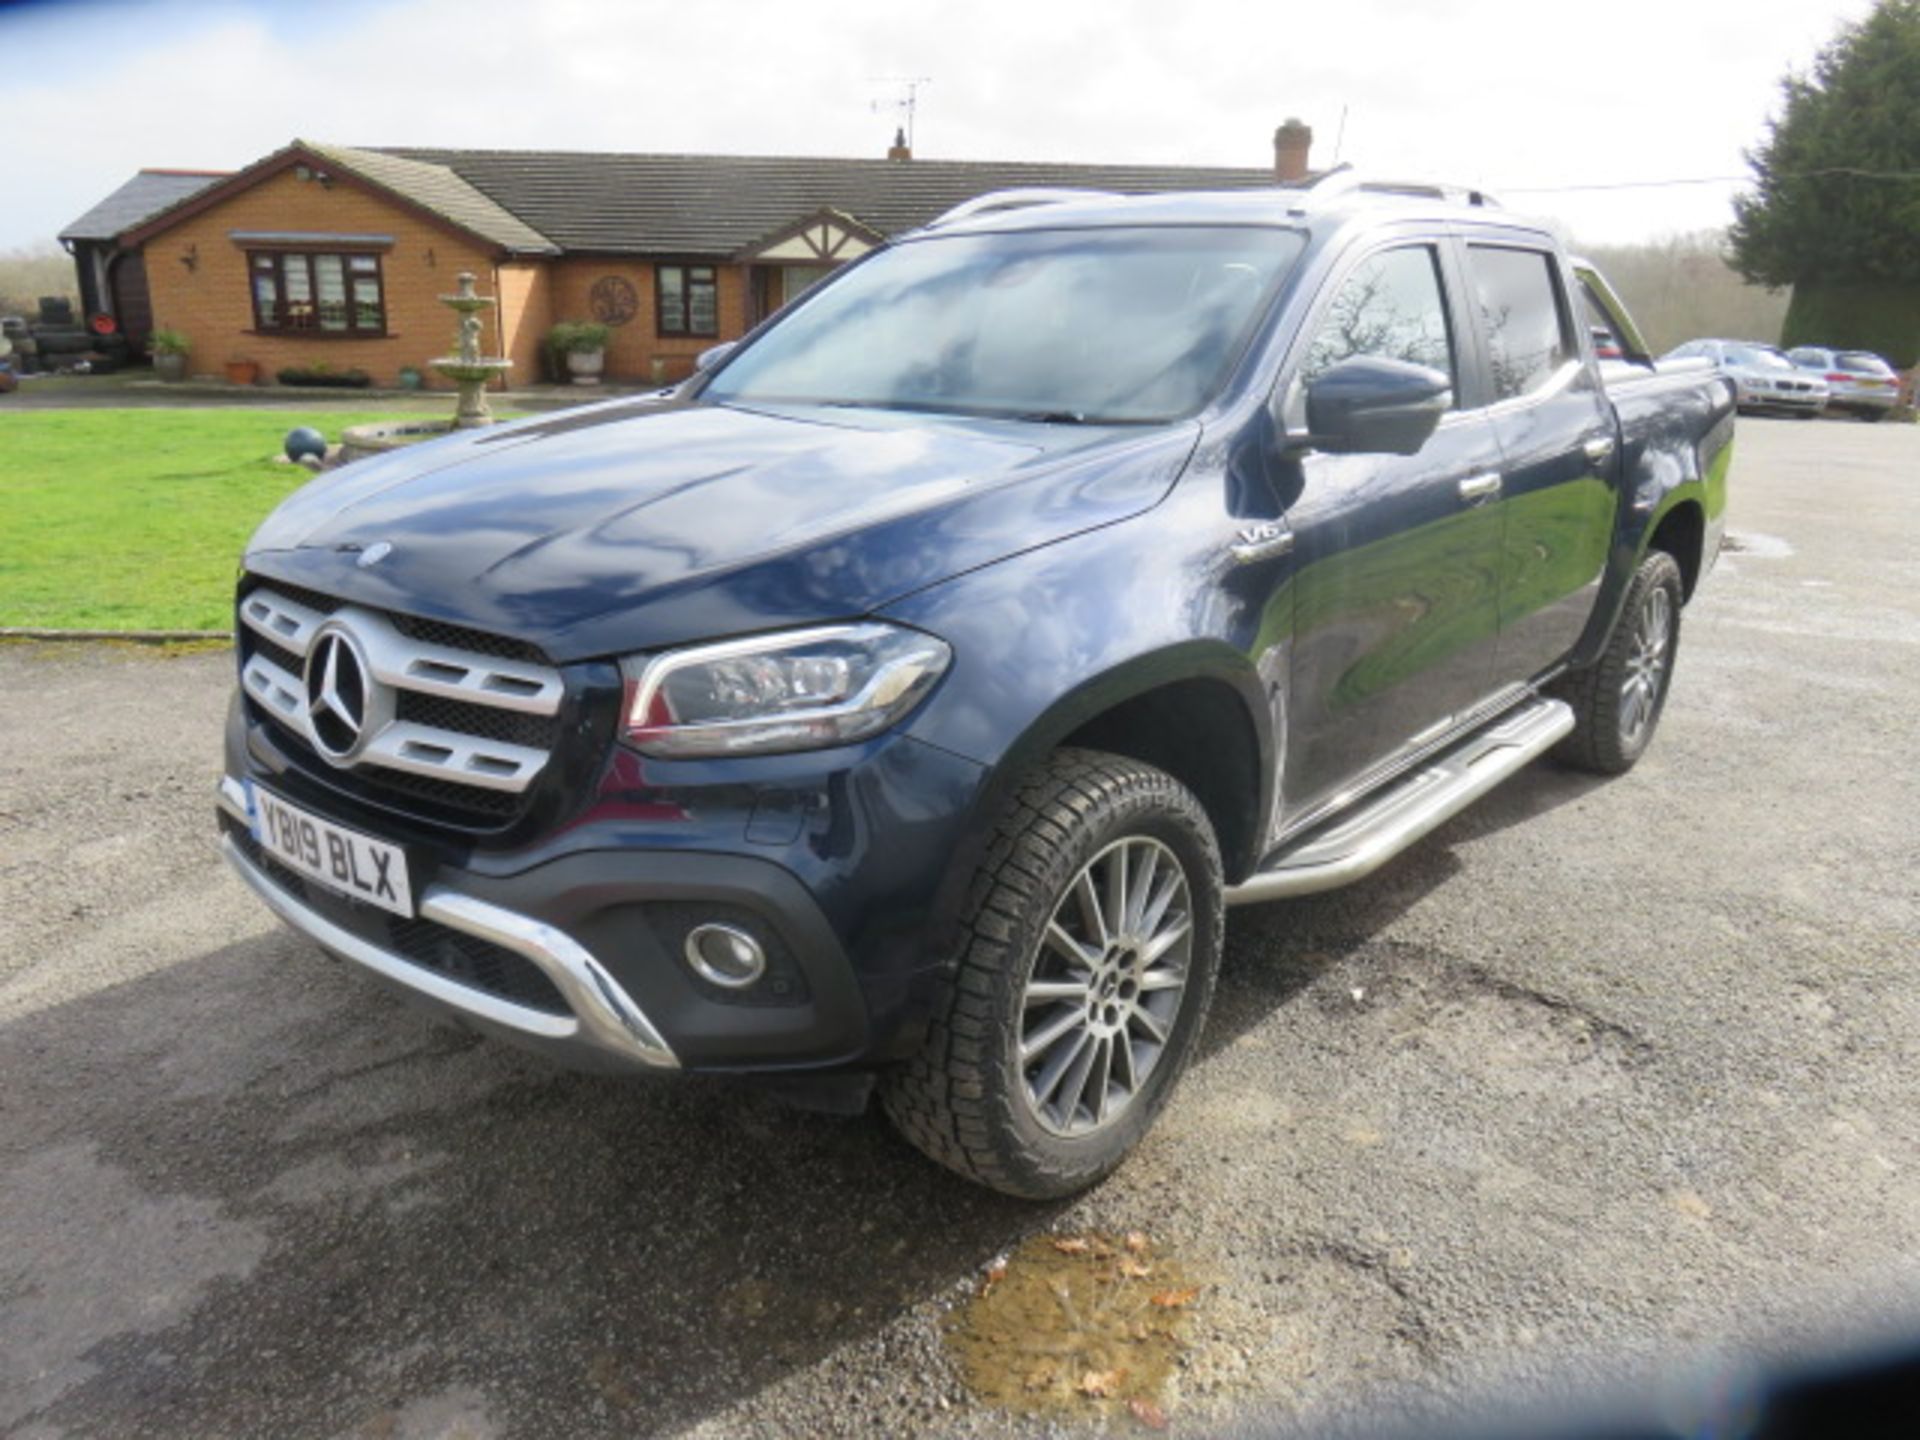 1 Mercedes Benz X-350 Power D 4MATIC 3.0 Diesel Pick Up - Image 3 of 13